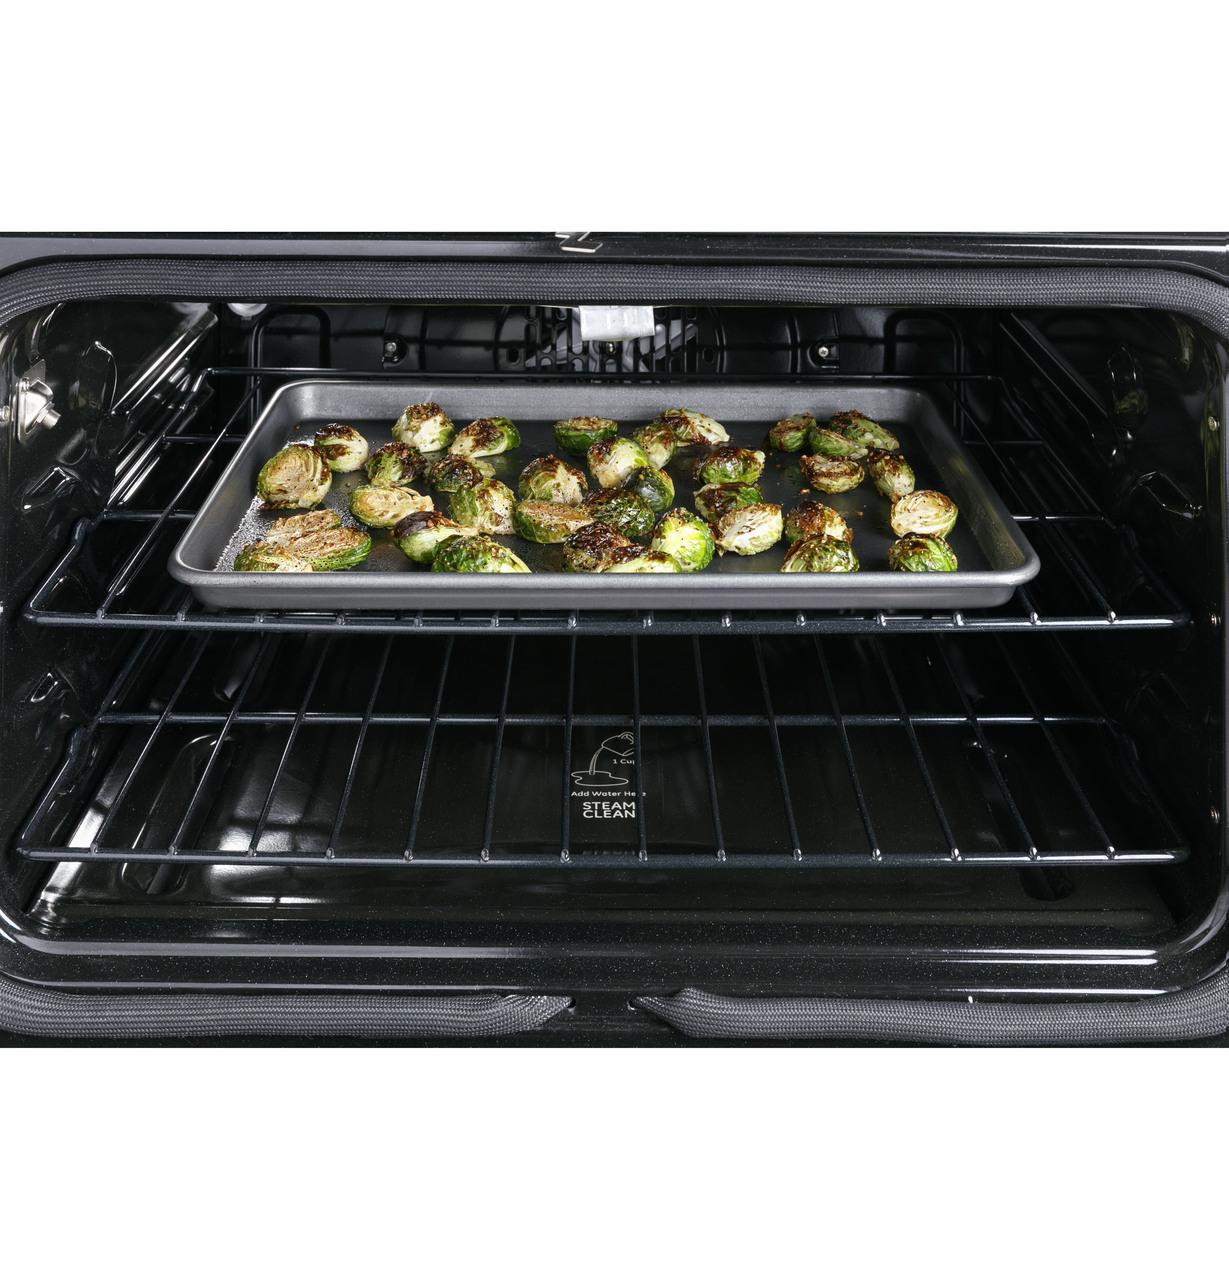 Cafe Caf(eback)™ 30" Smart Slide-In, Front-Control, Induction and Convection Range with Warming Drawer